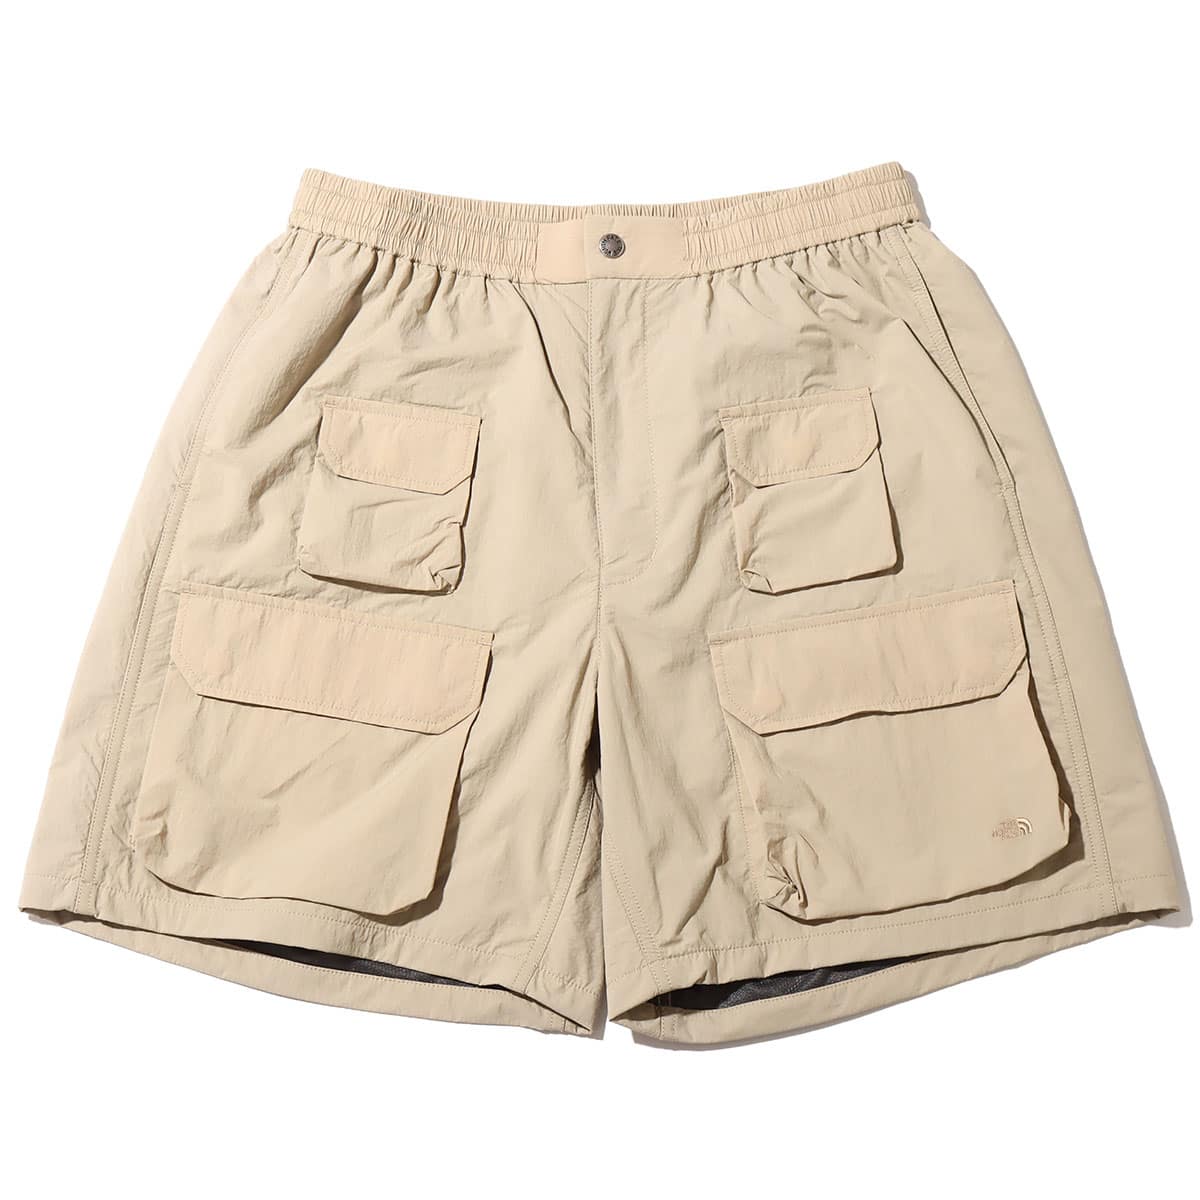 THE NORTH FACE PURPLE LABEL Nylon Ripstop Trail Shorts Beige 23SS-I